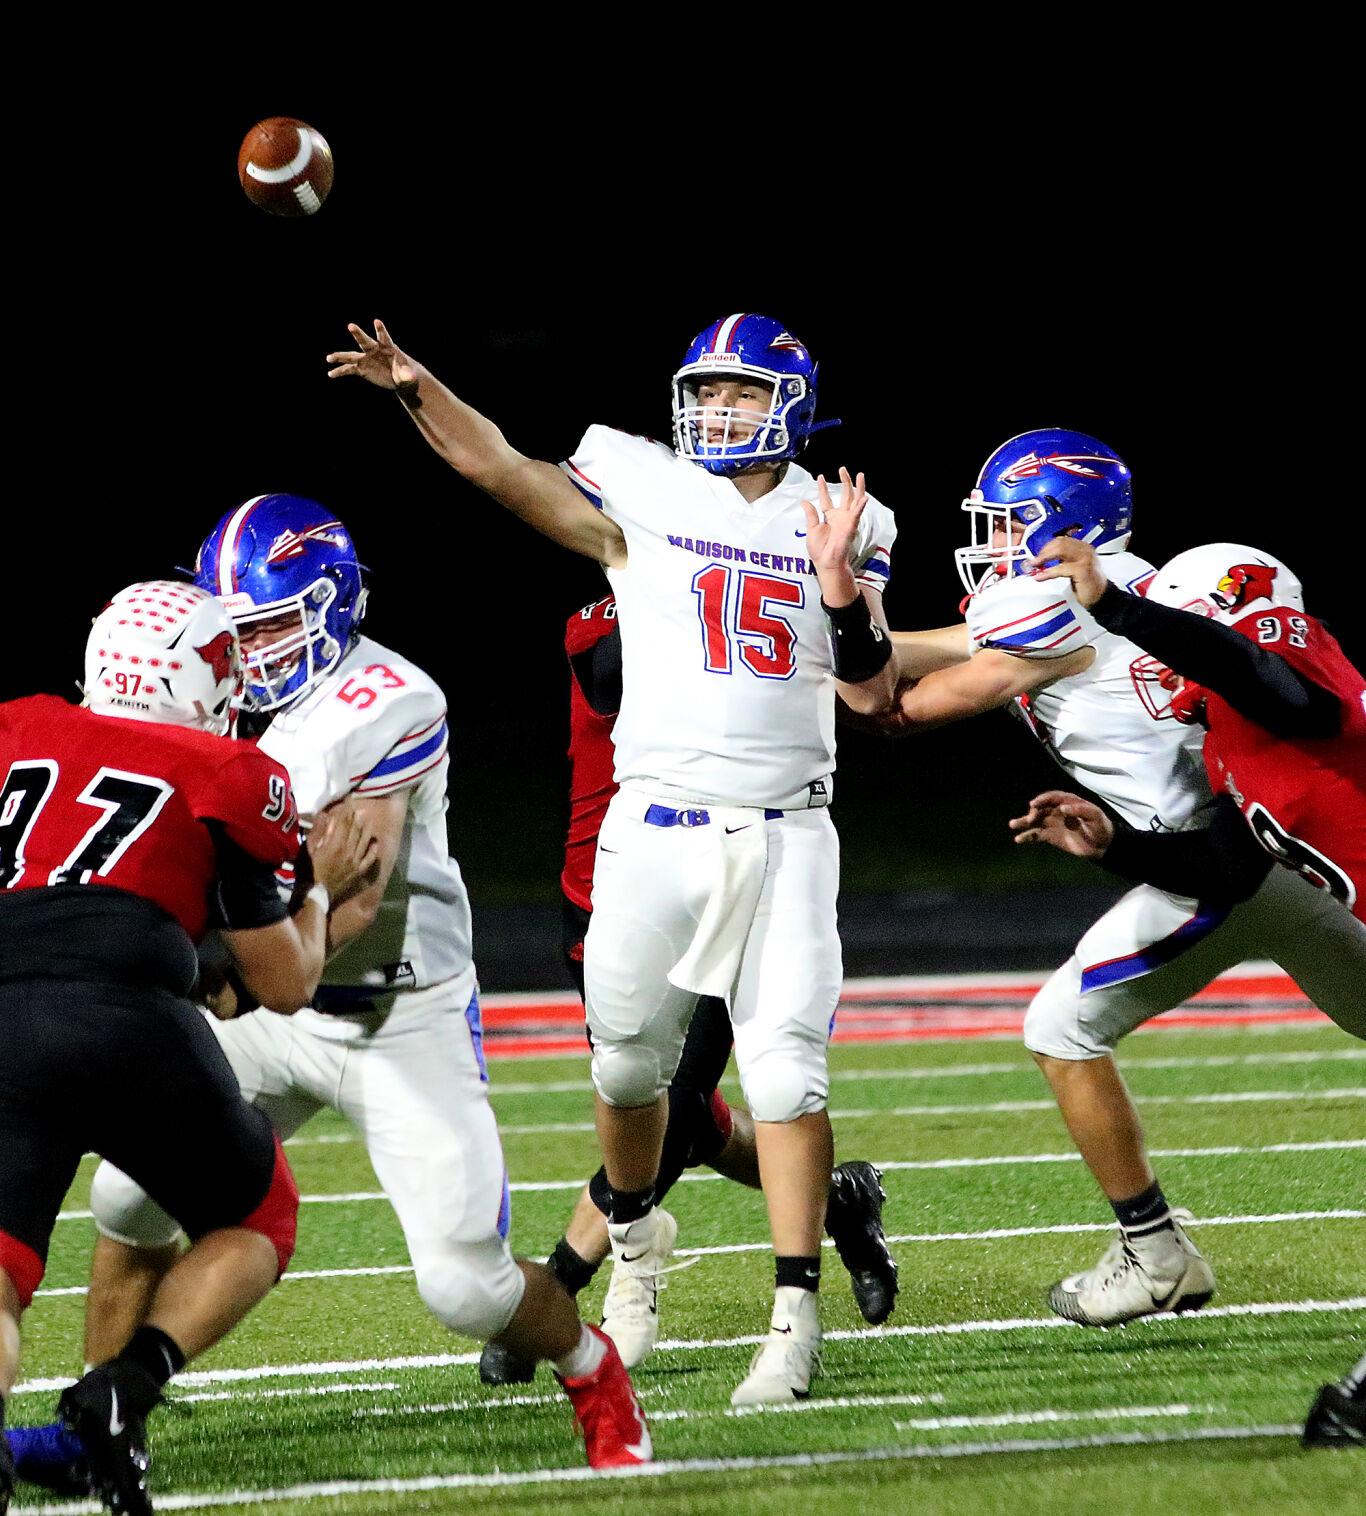 HS FOOTBALL PREVIEW: Madison Central Indians dedicating this season to